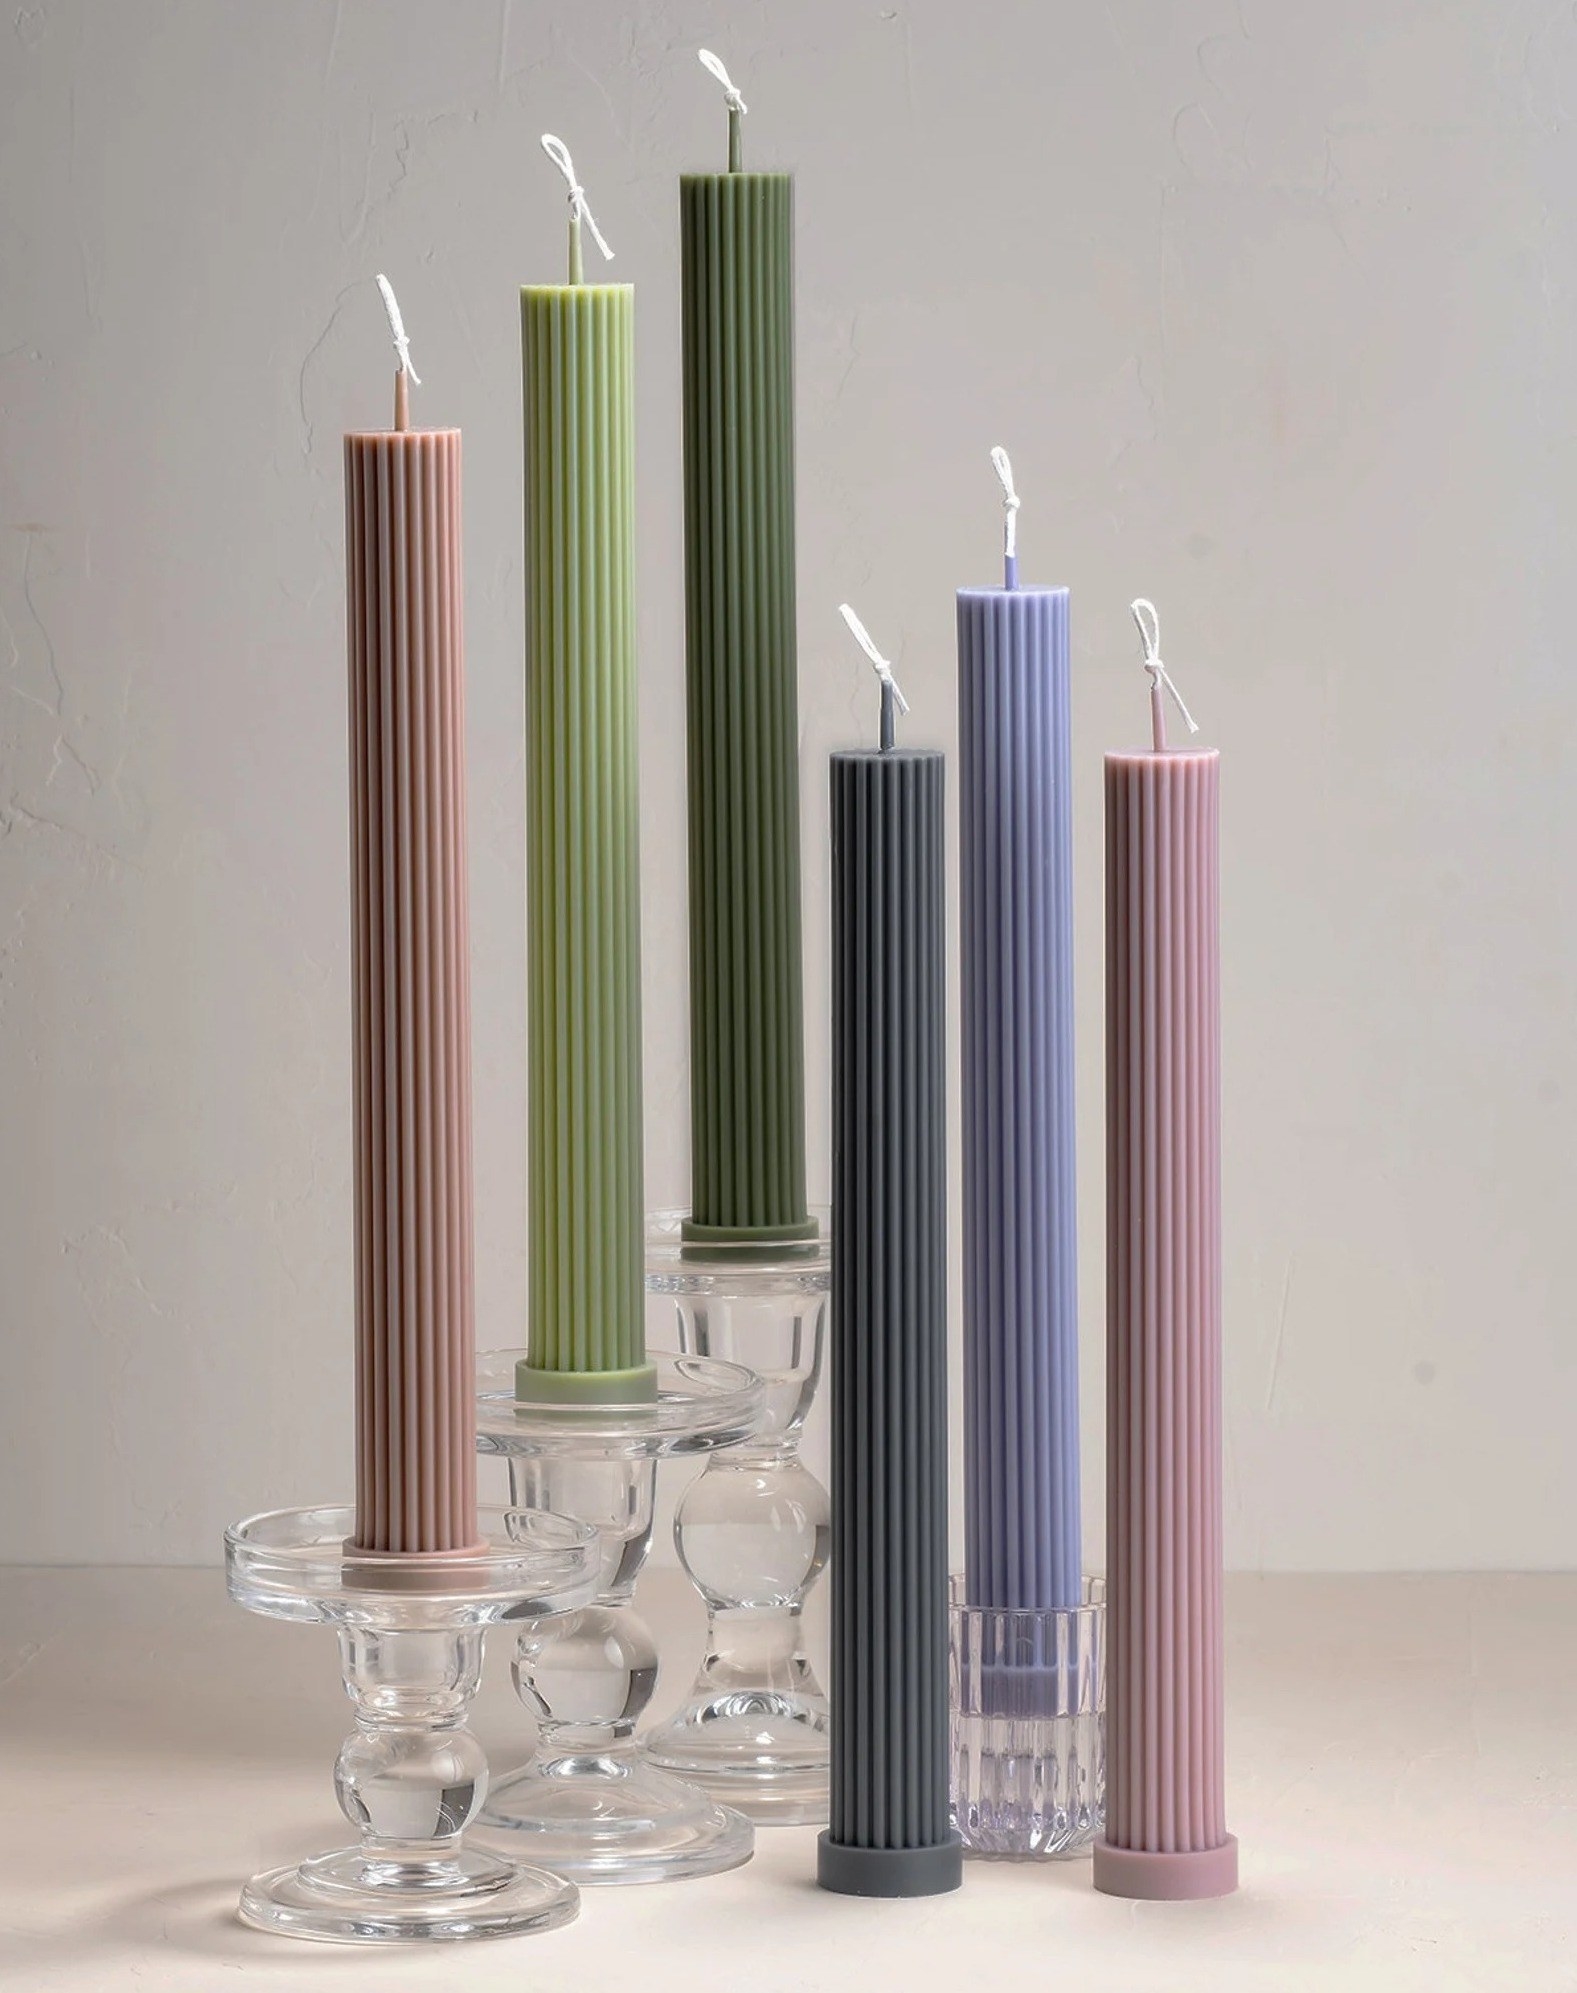 A variety of the candles are shown in different colors